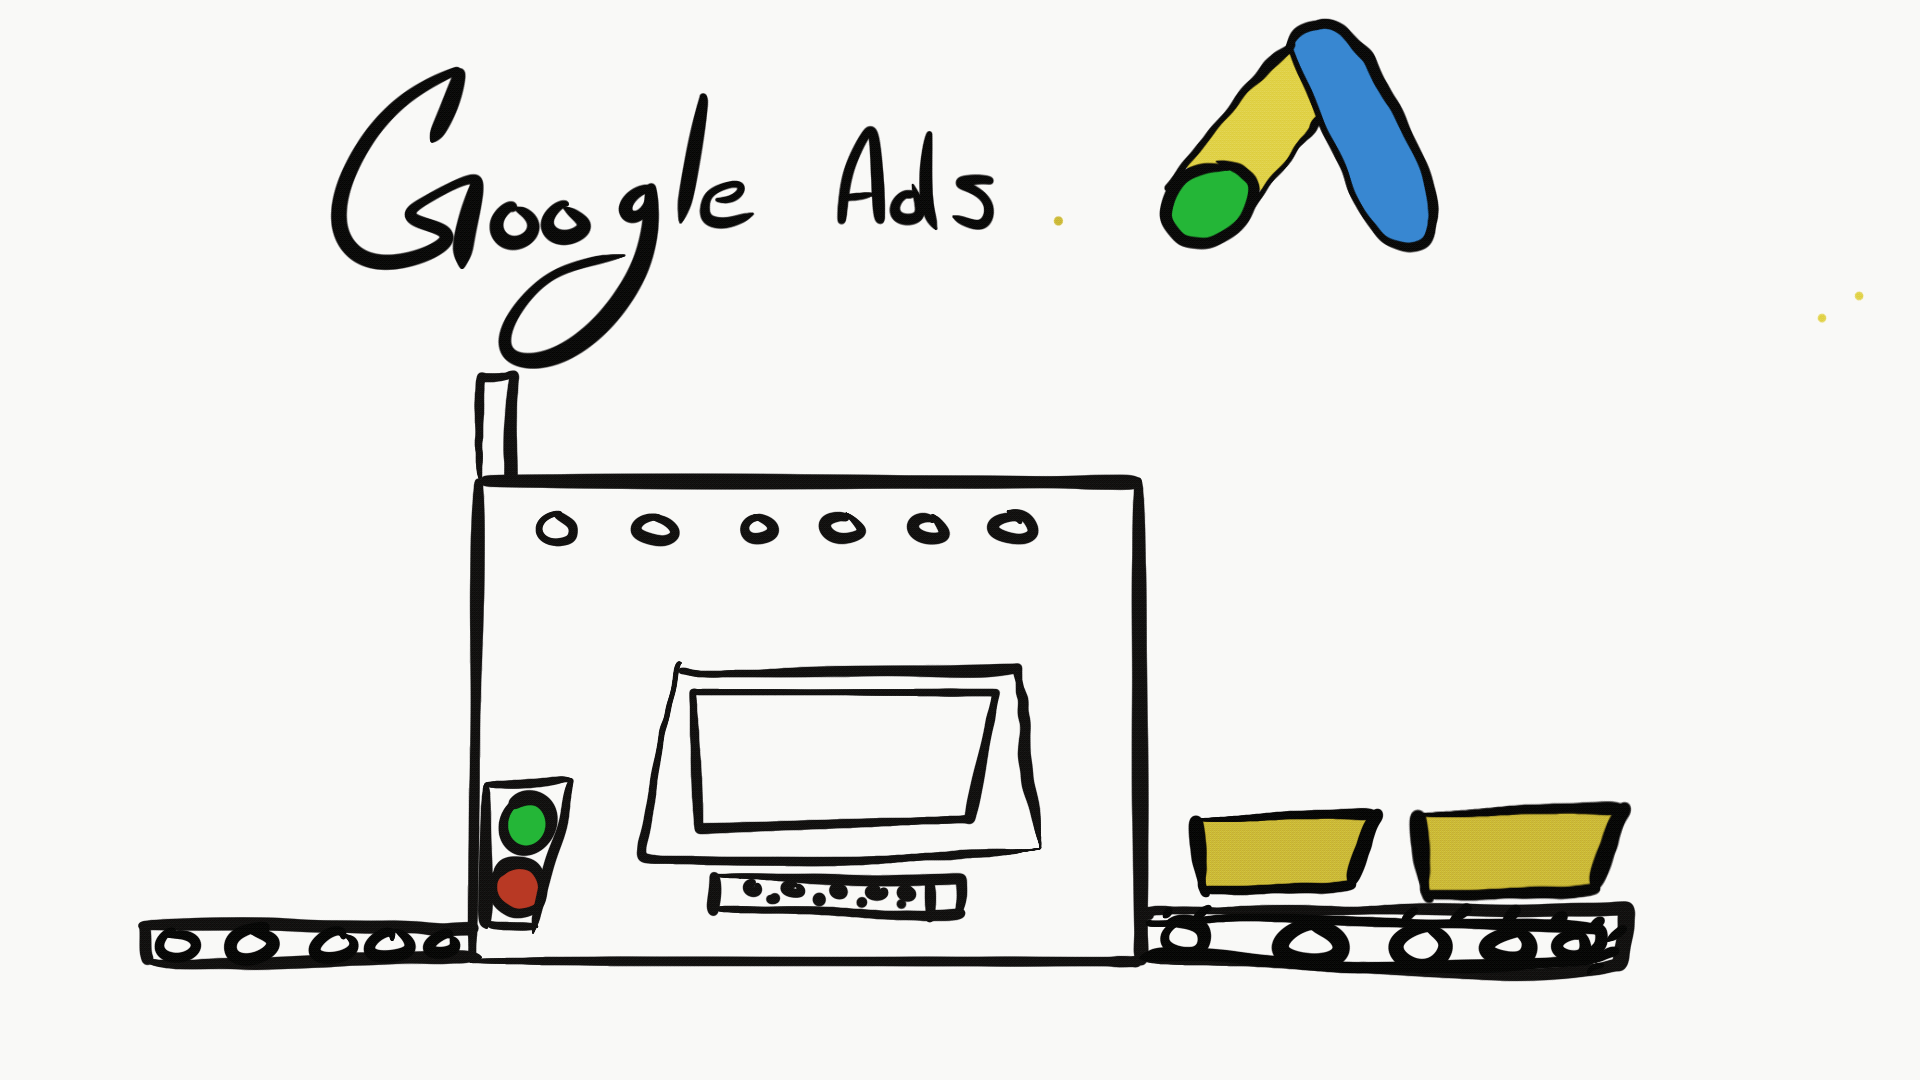 Google ads empire was built on three core principles